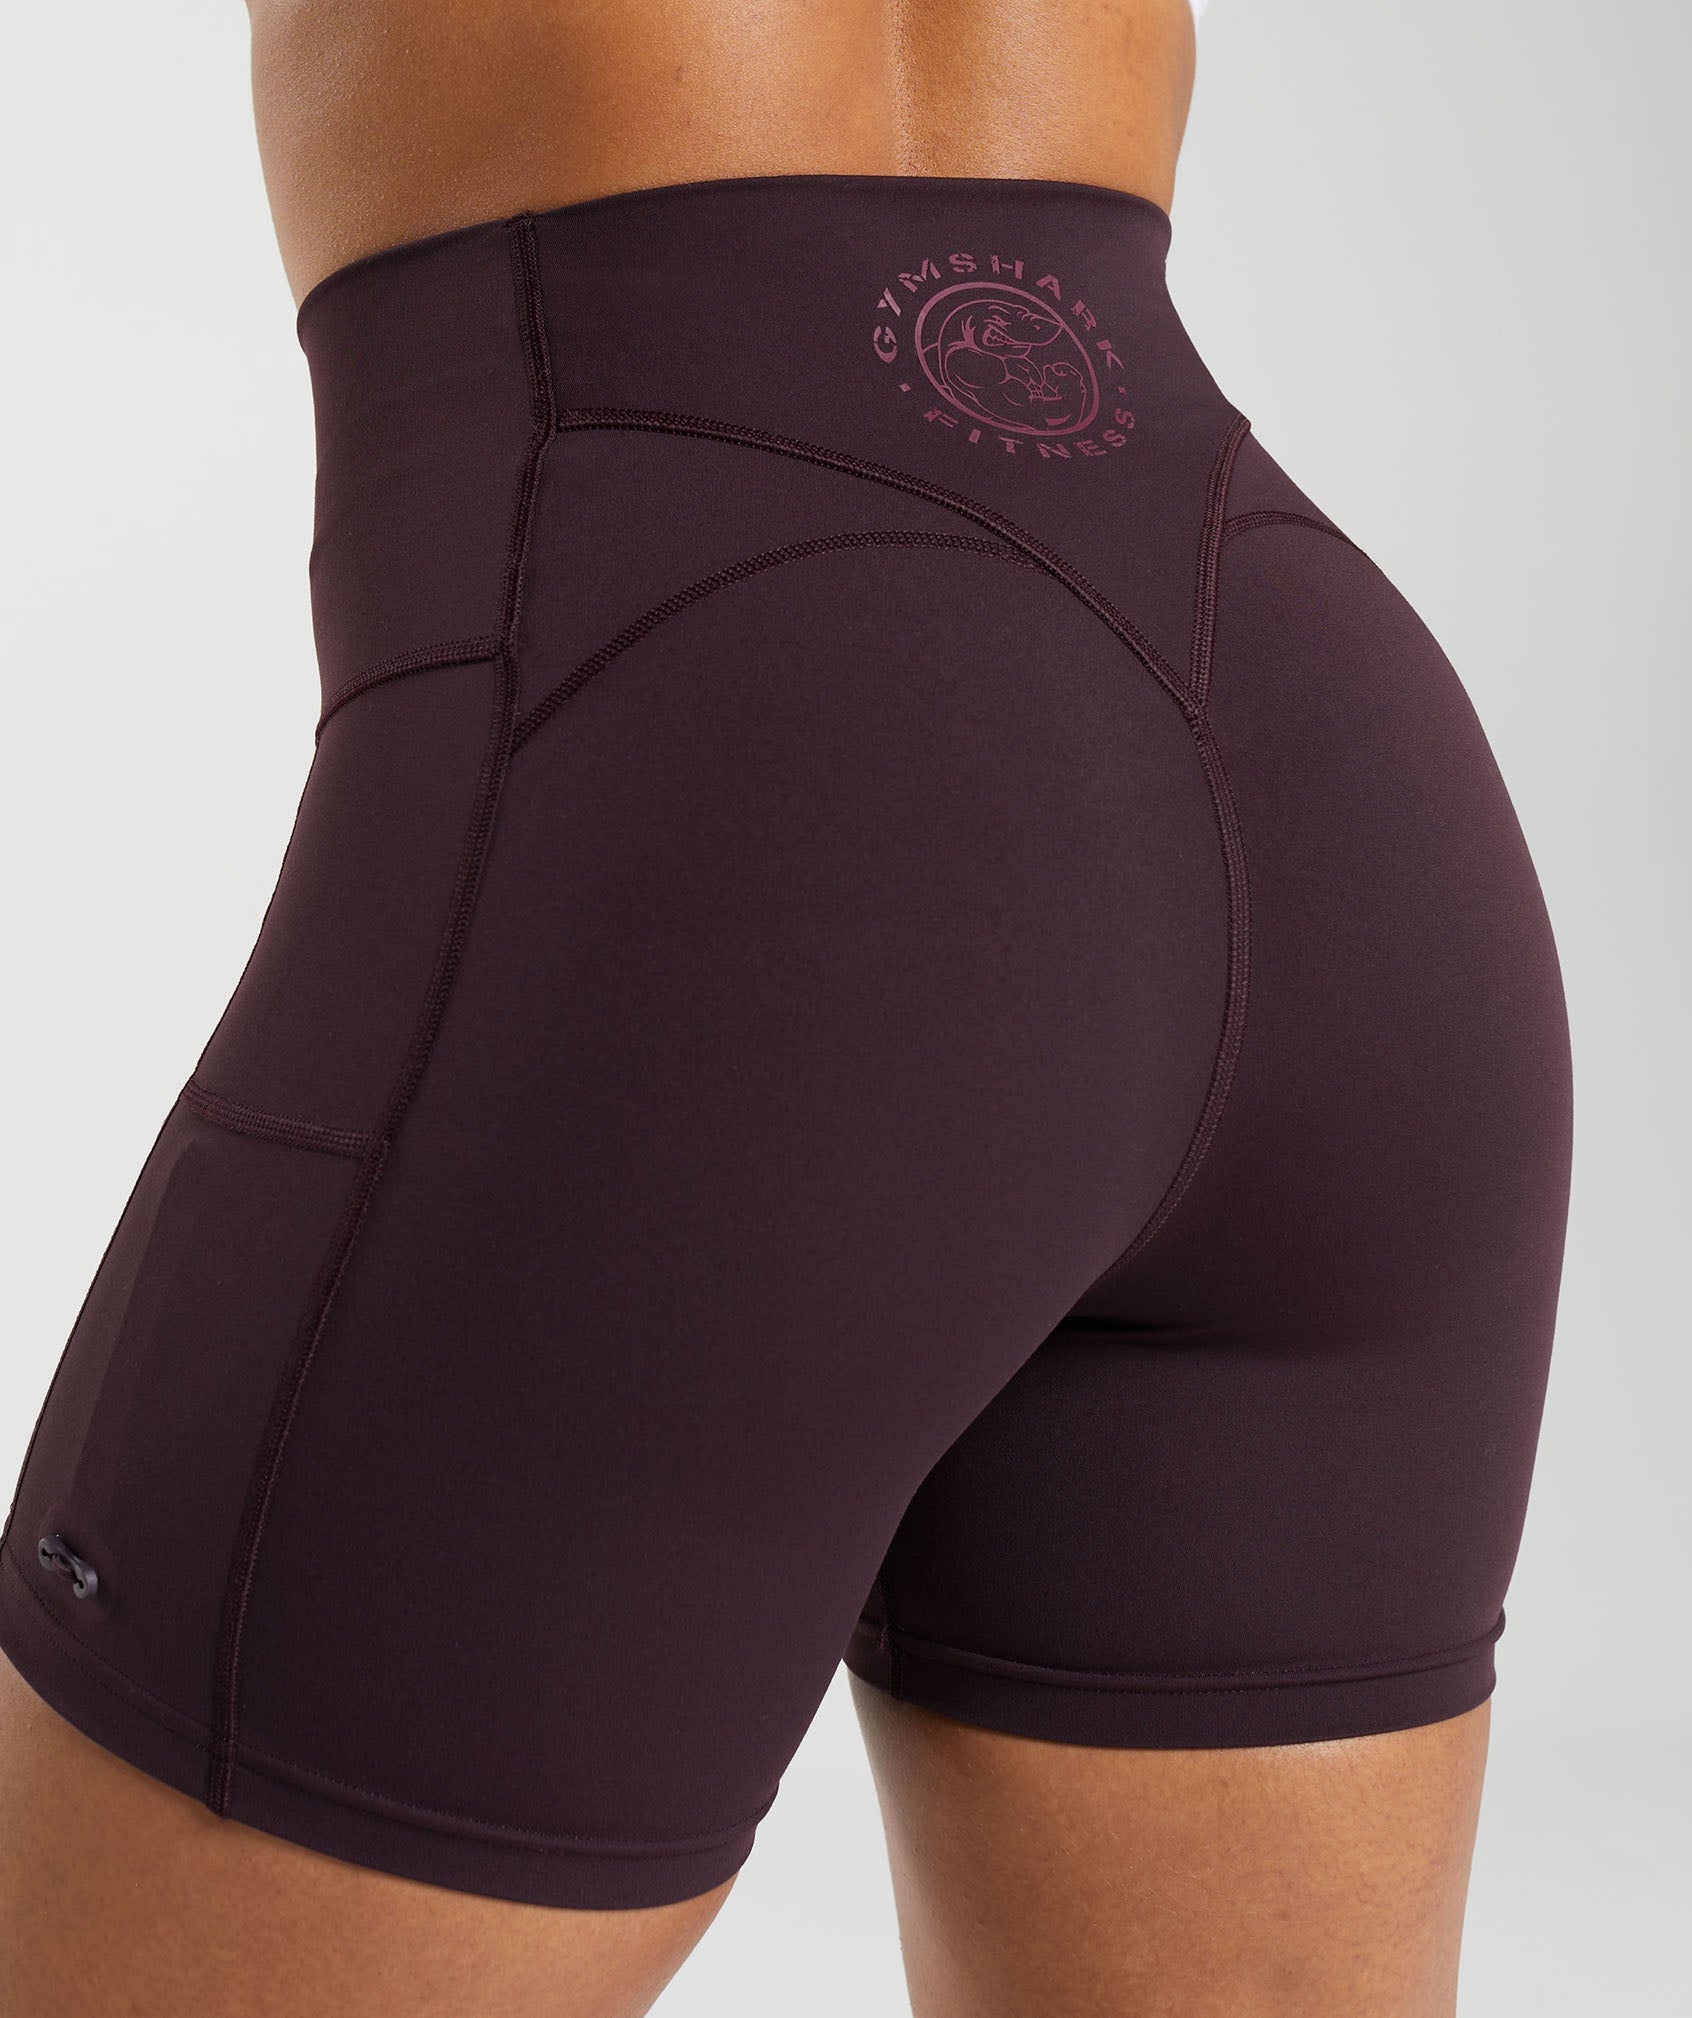 Legacy Tight Shorts in Plum Brown - view 5